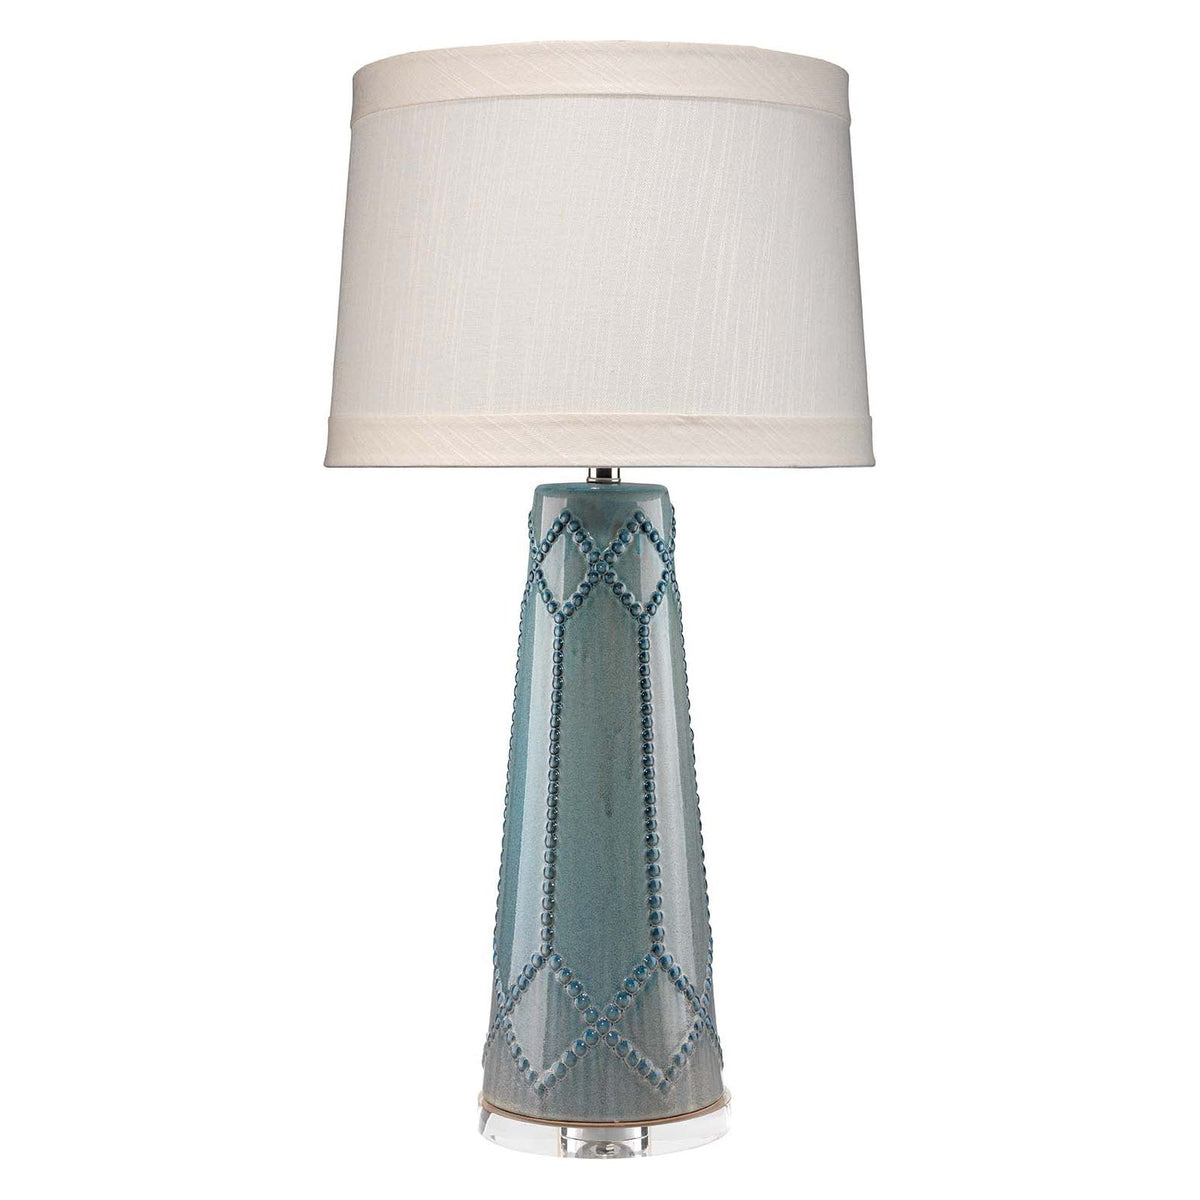 Jamie Young Company - 9HOBNAILTEAL - Hobnail Table Lamp - Hobnail - Teal